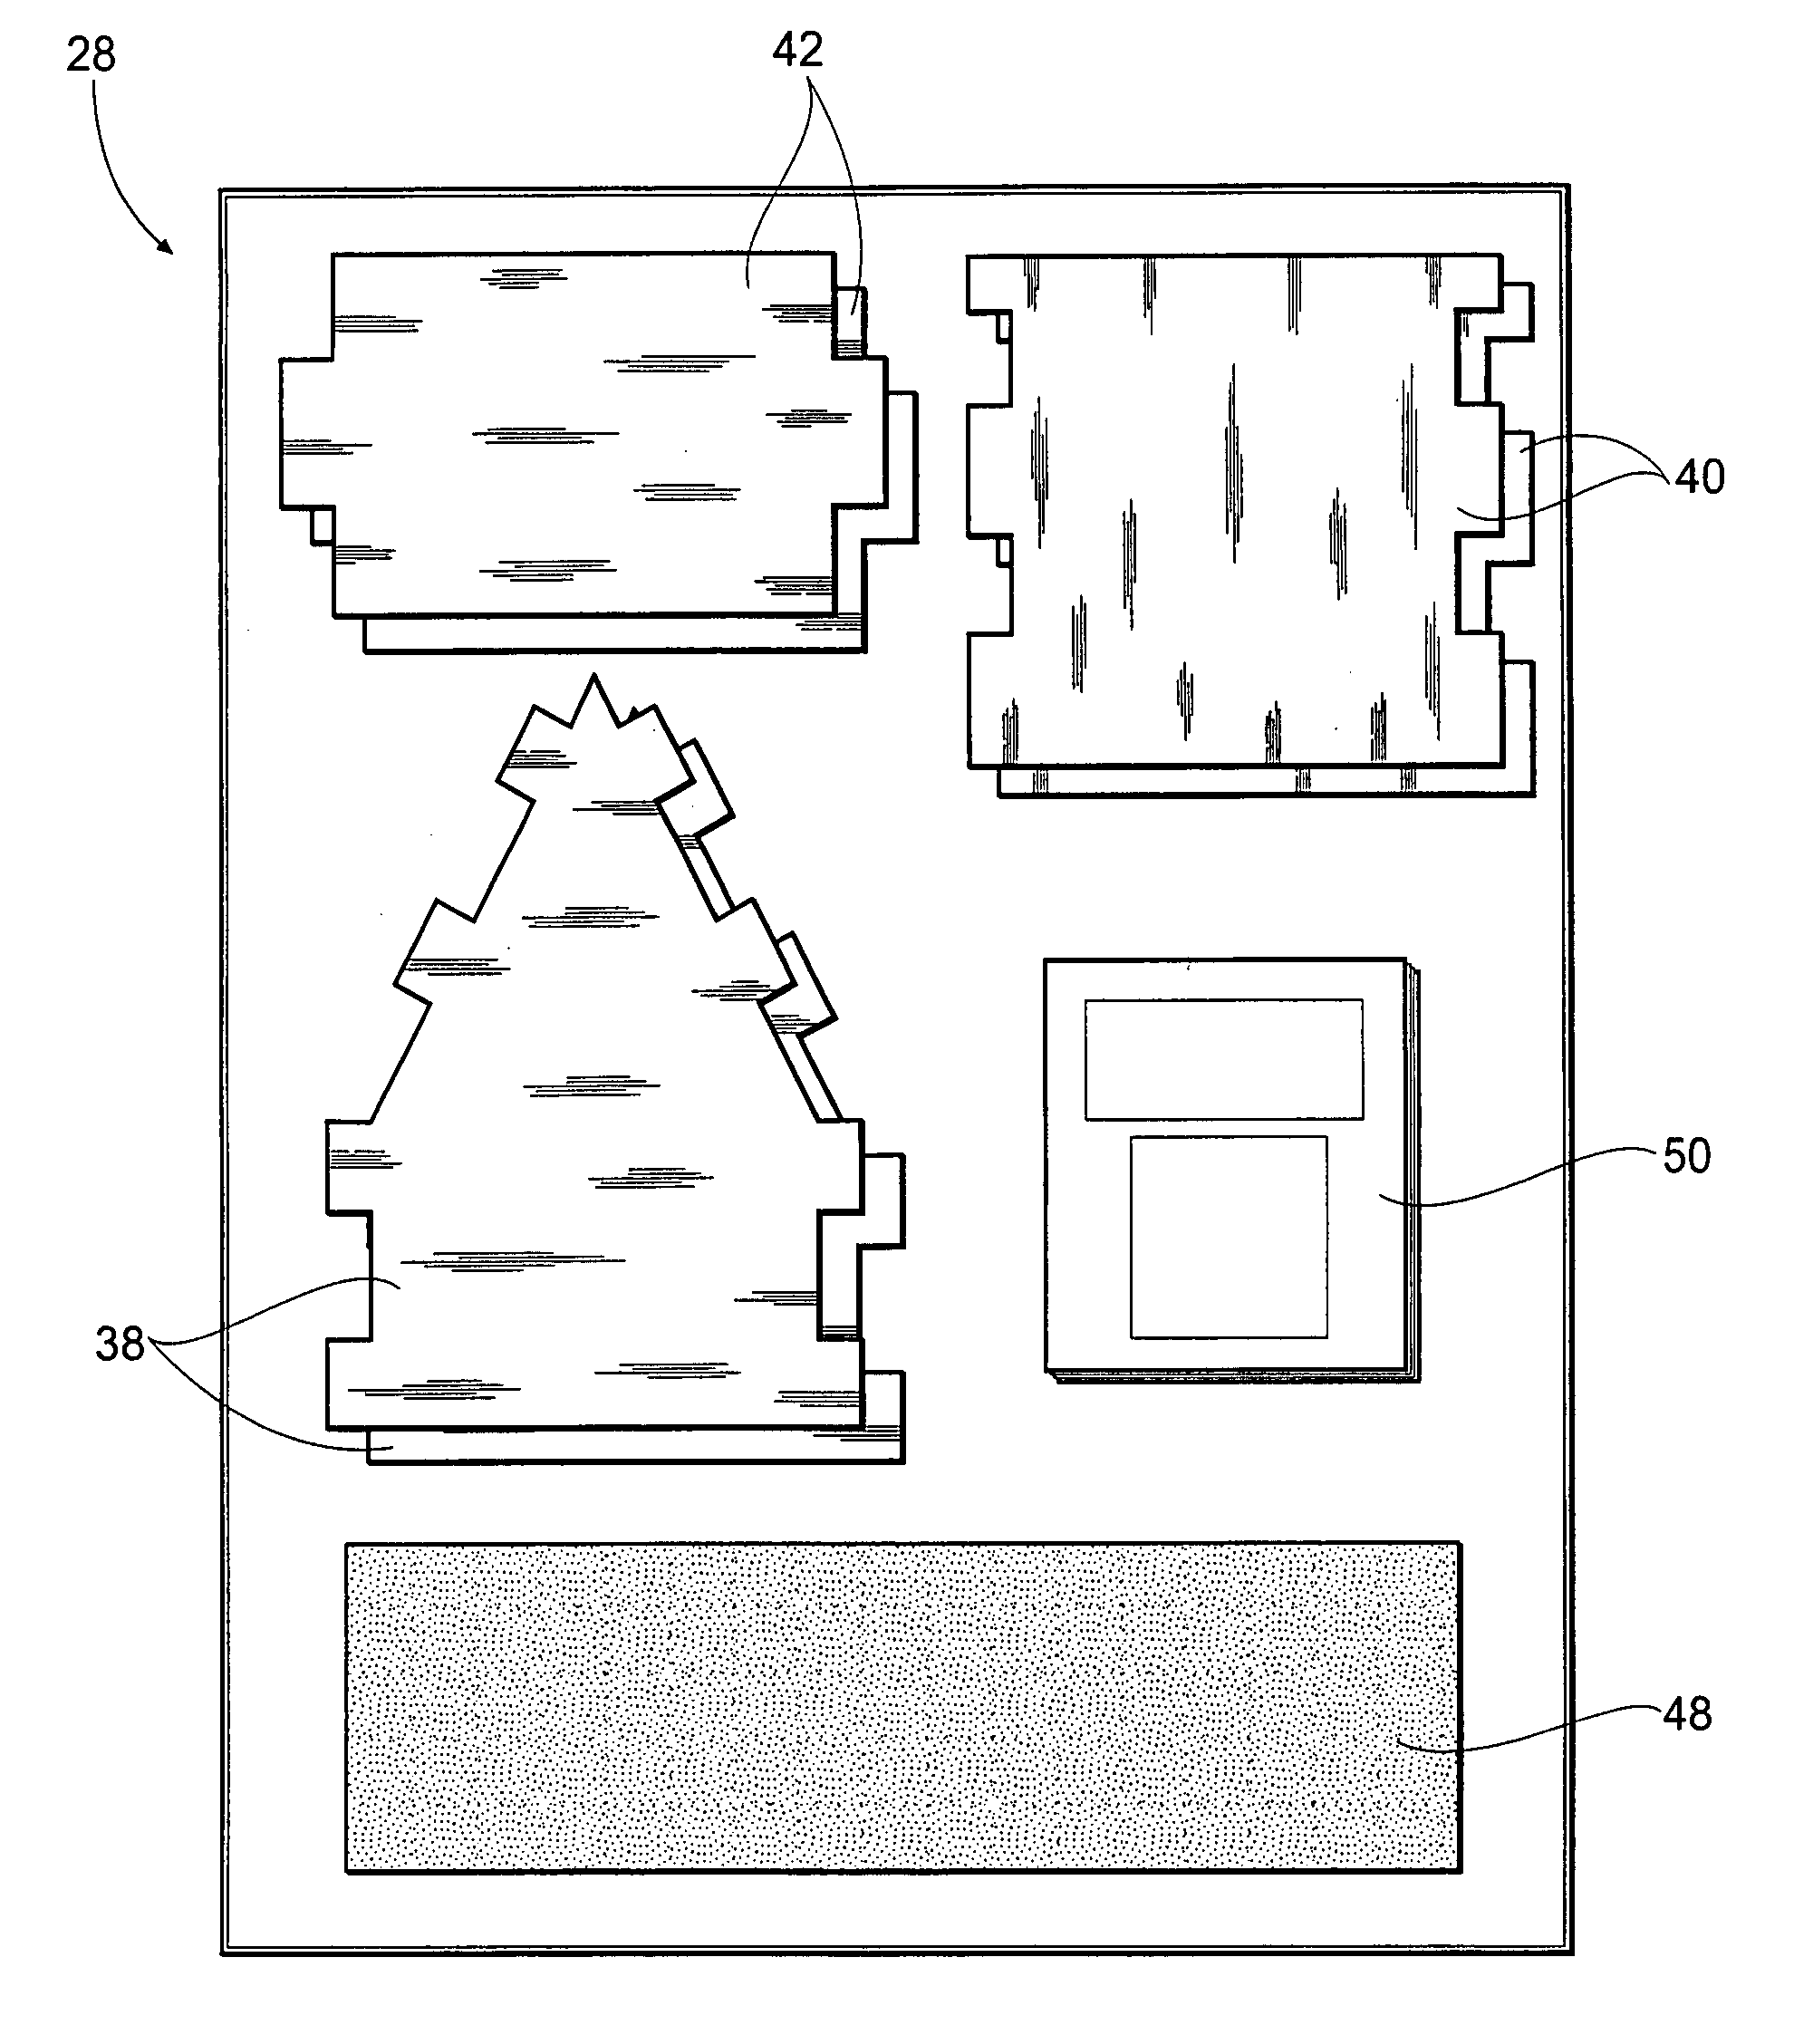 Systems and methods for building an interlocking decorative house